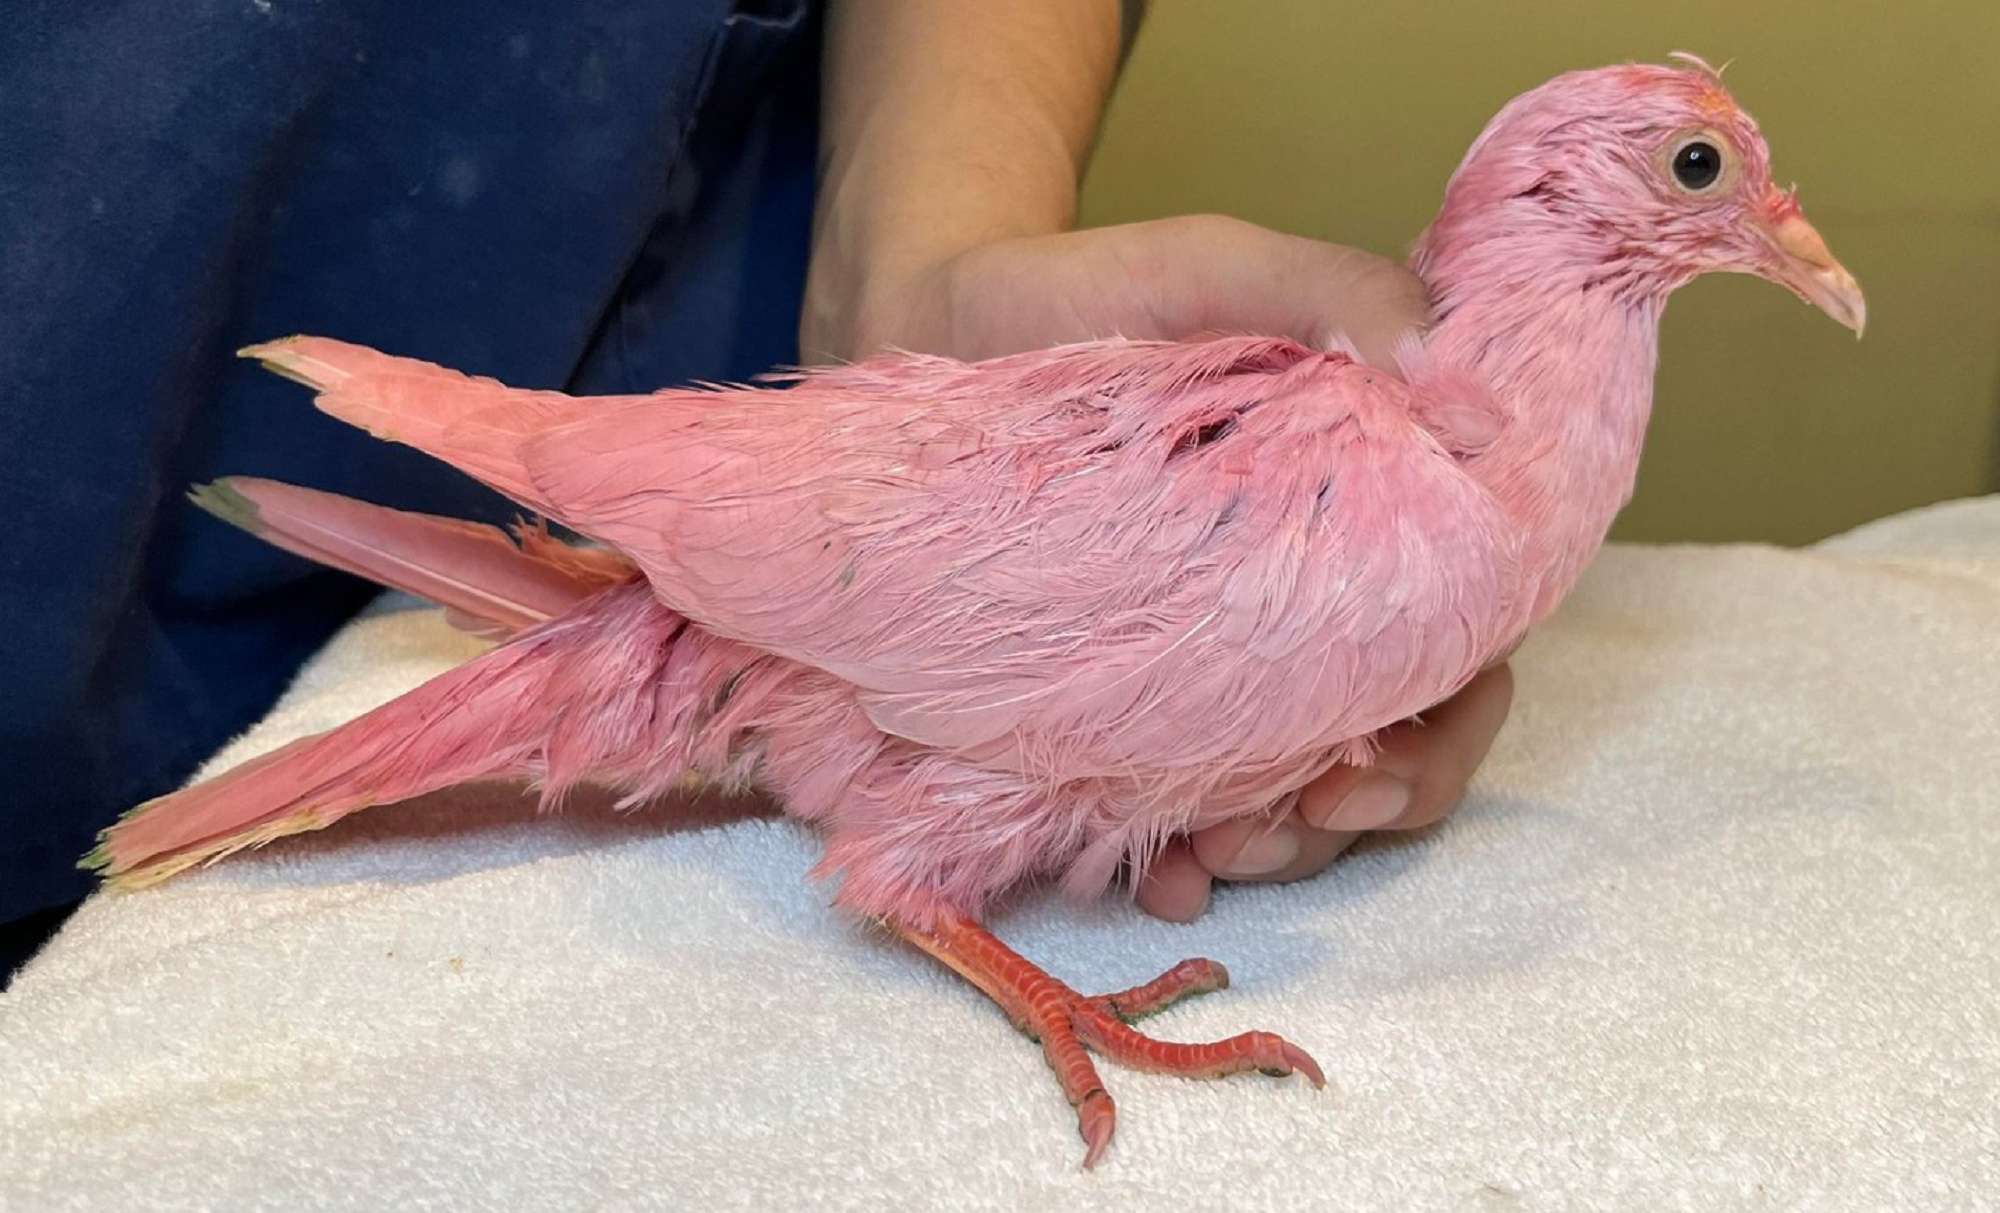 Pink pigeon in New York City wildlife rescue center that was dyed for gender reveal party